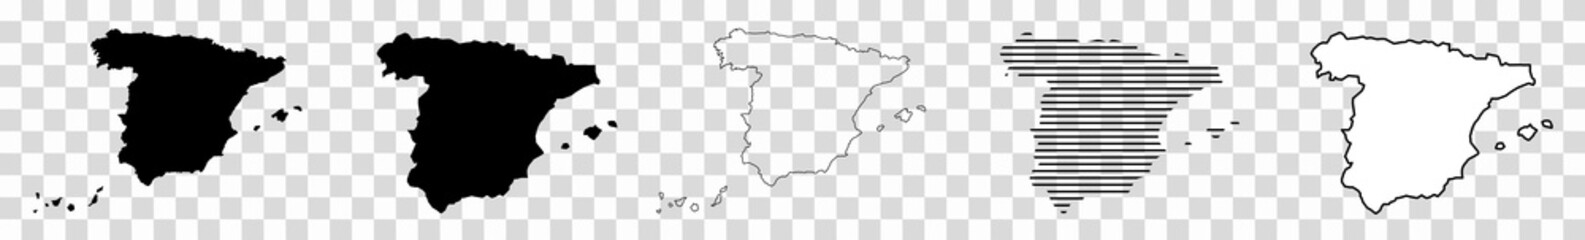 Spain Map Black | Spanish Border | State Country | Transparent Isolated | Variations